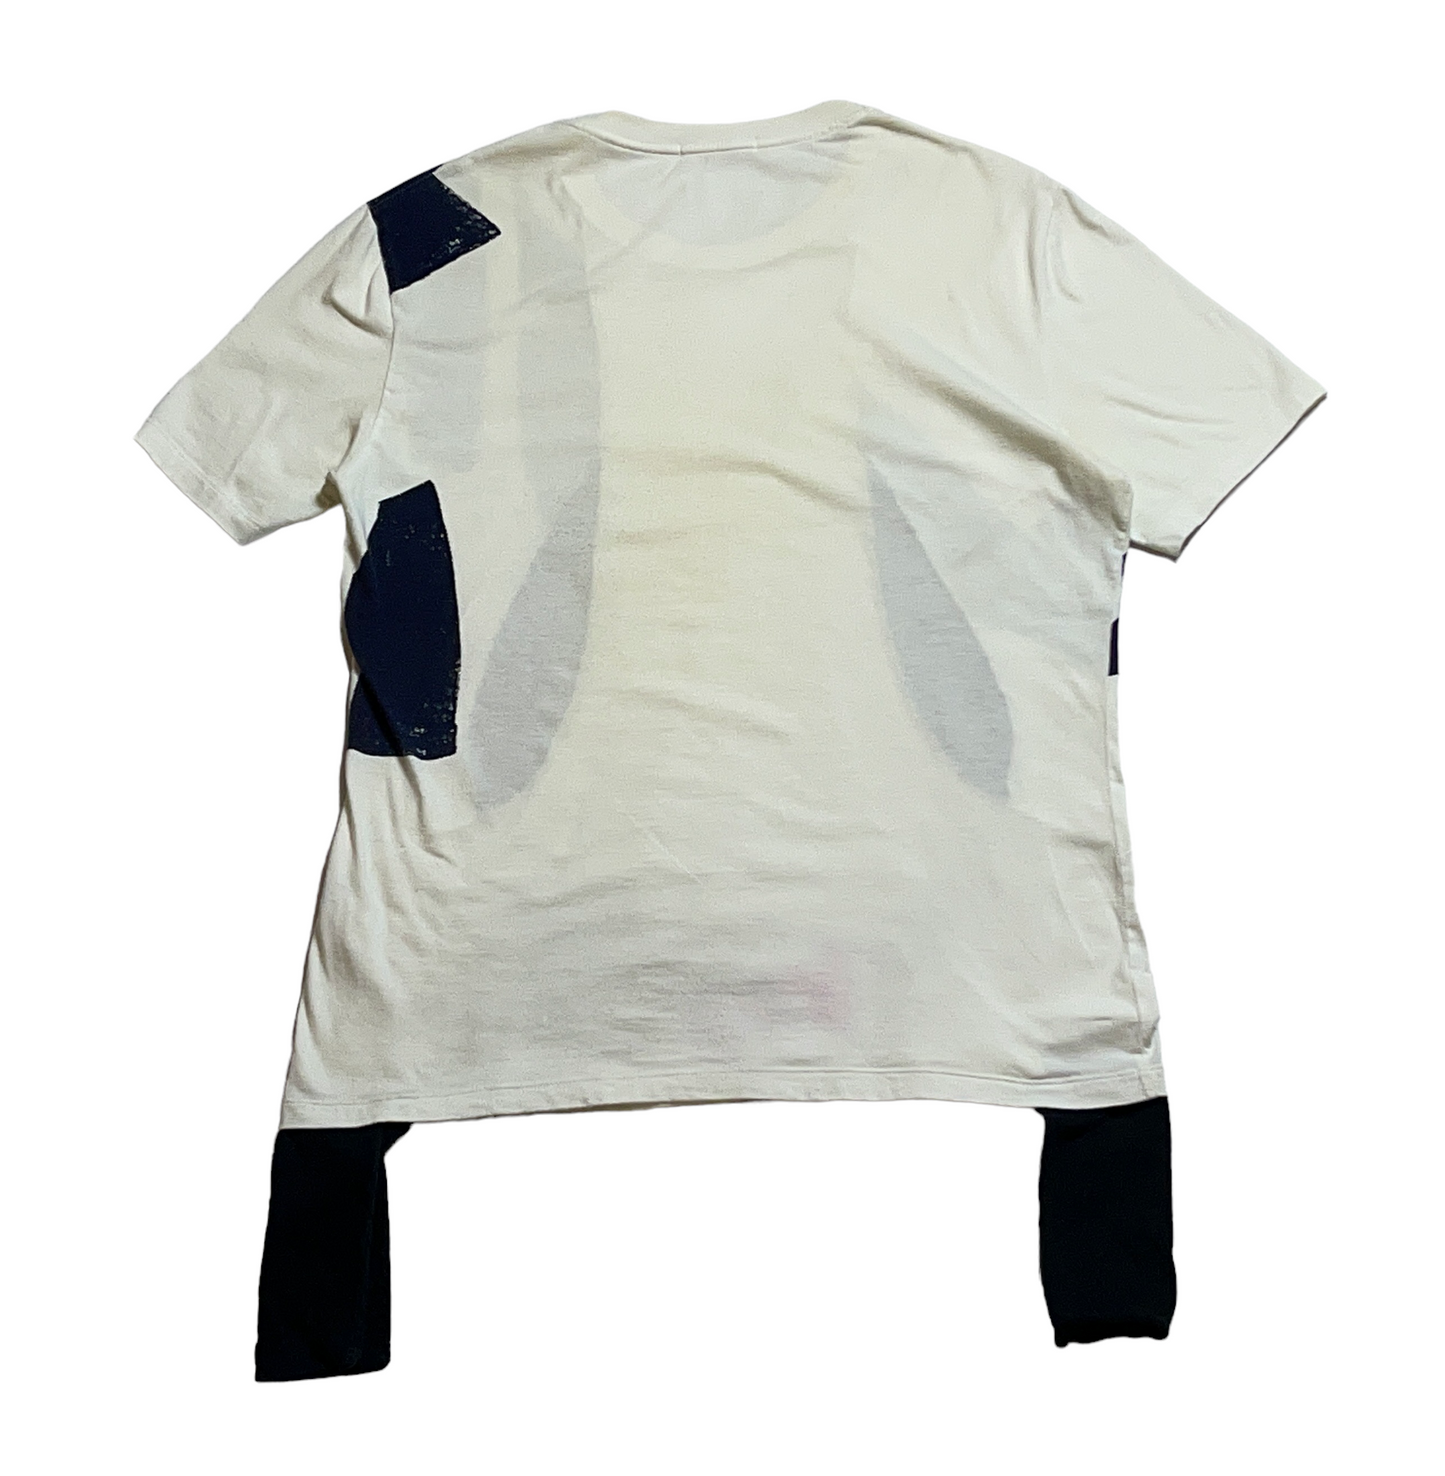 Helmut Lang SS03 Deconstructed Abstract Patchwork Tee